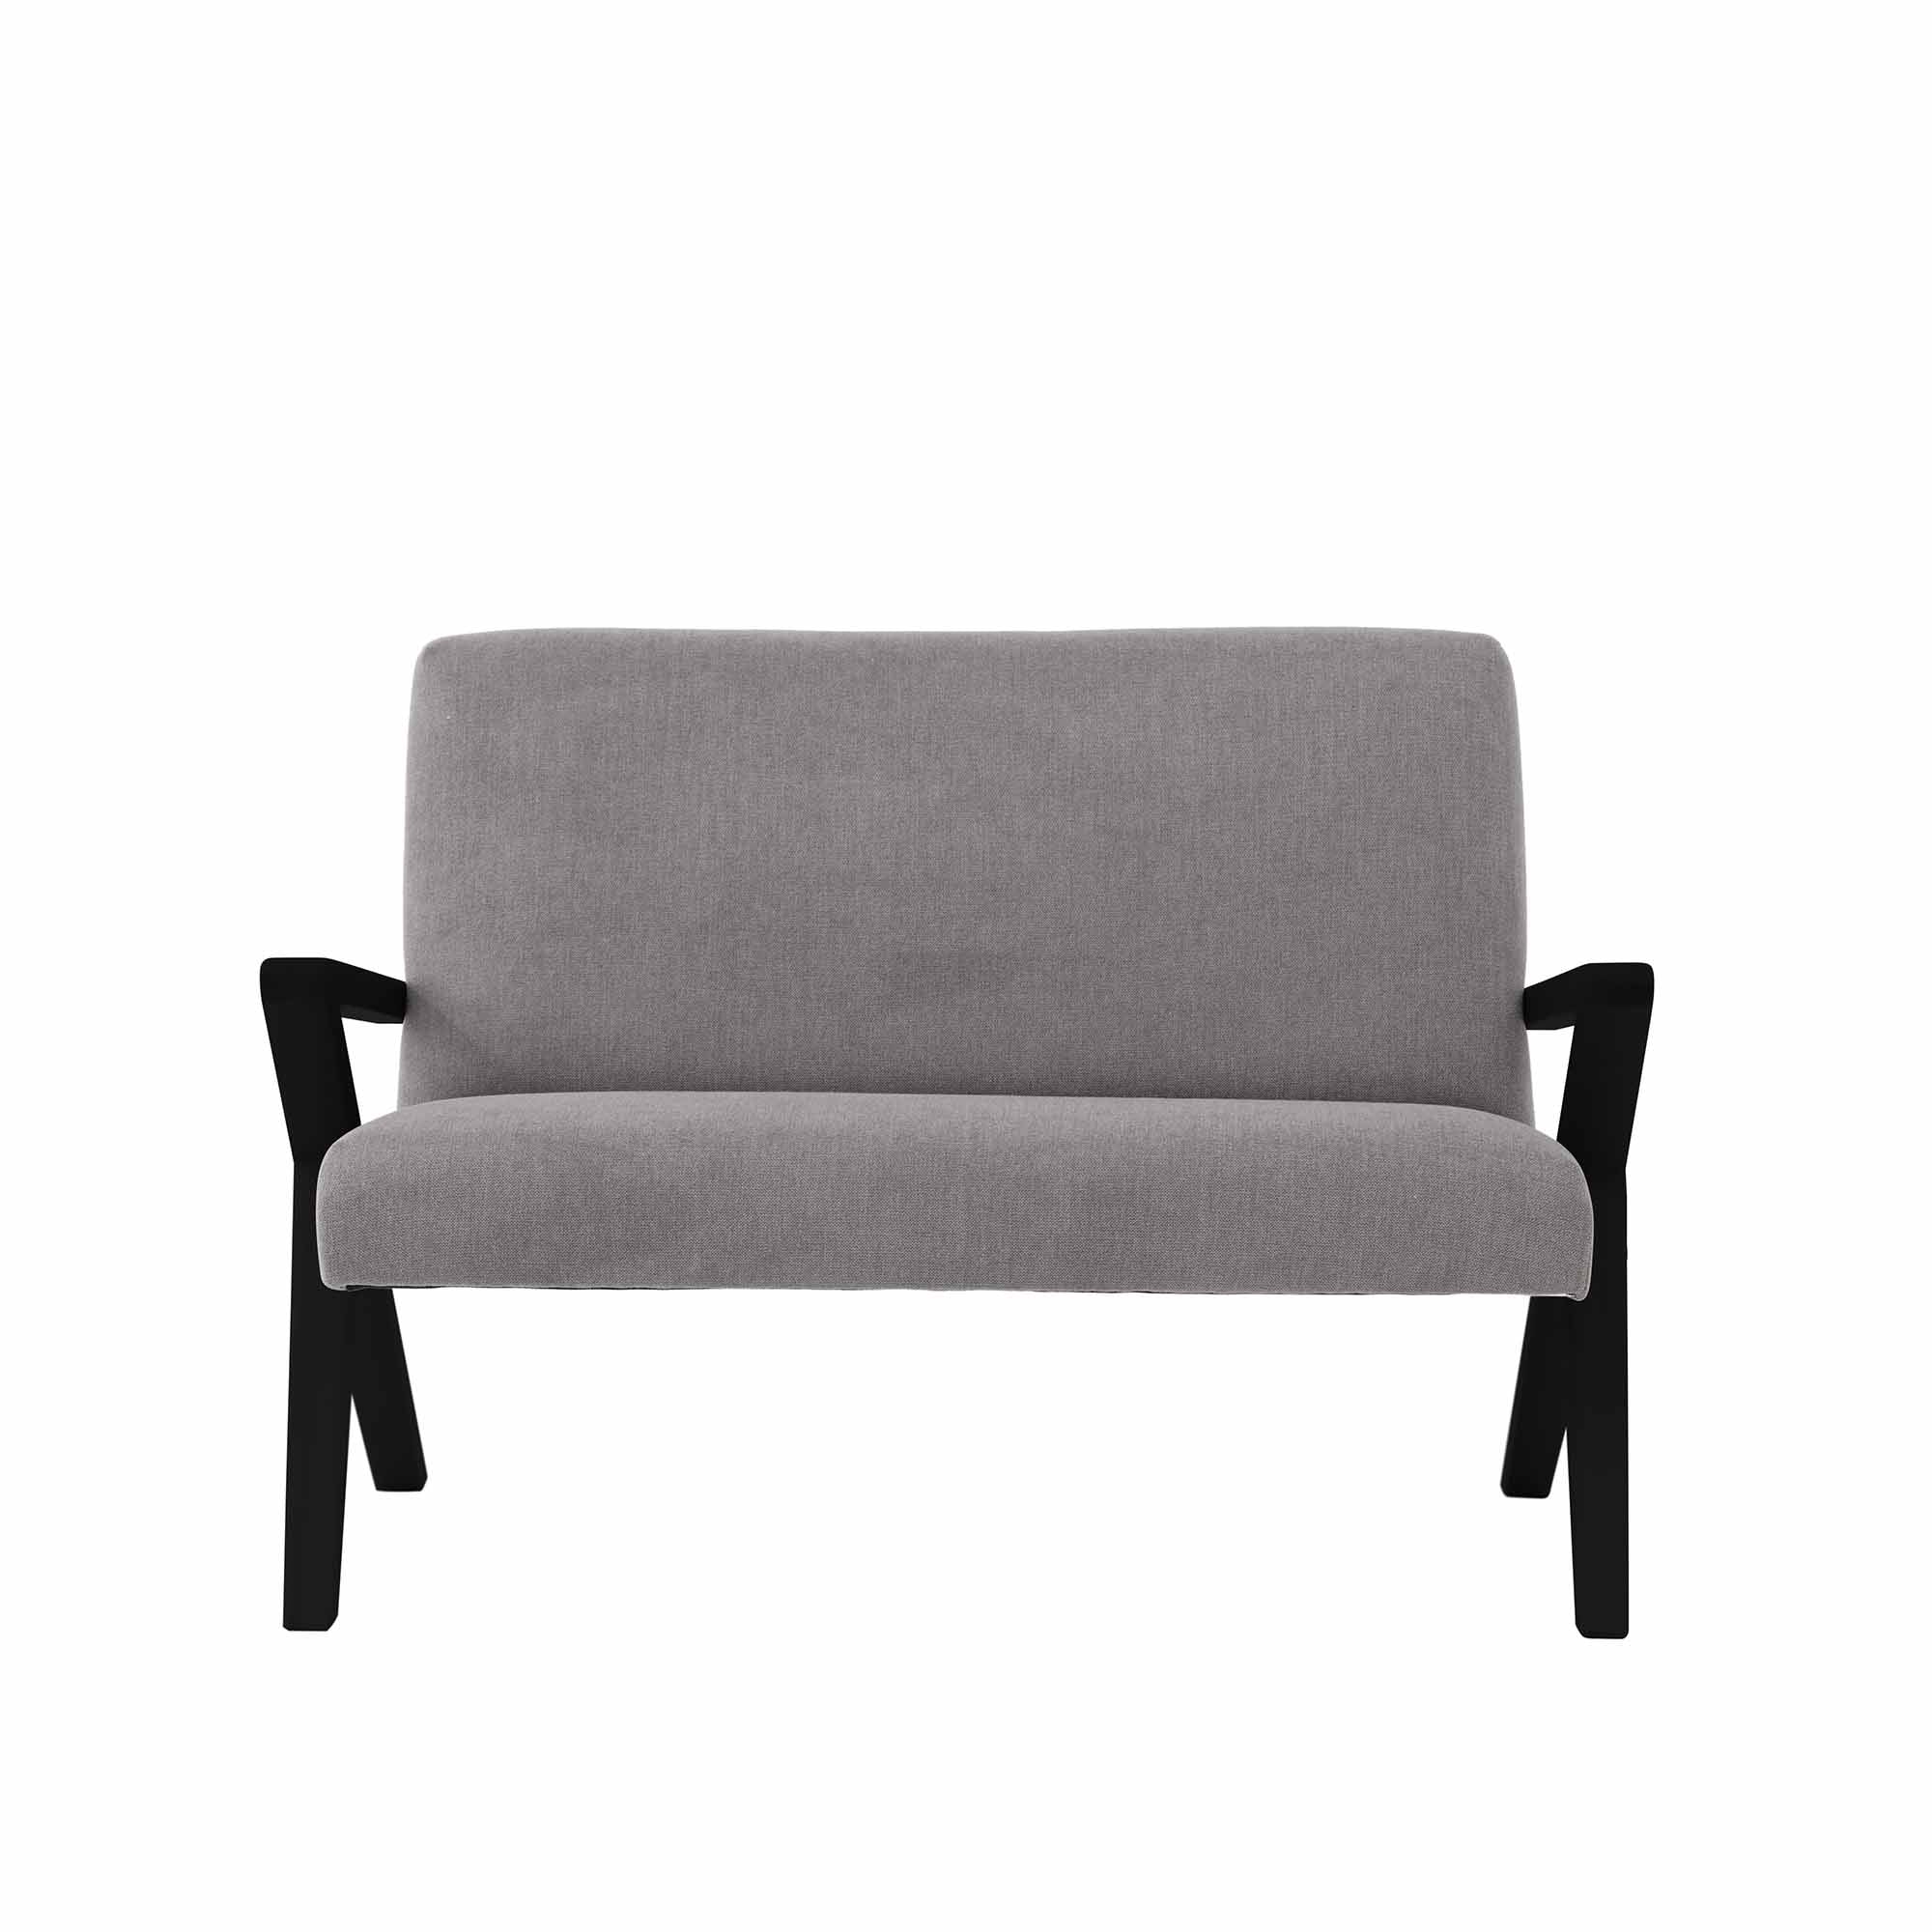  2-Seater Sofa, Beech Wood Frame, Black Lacquered grey fabric, front view